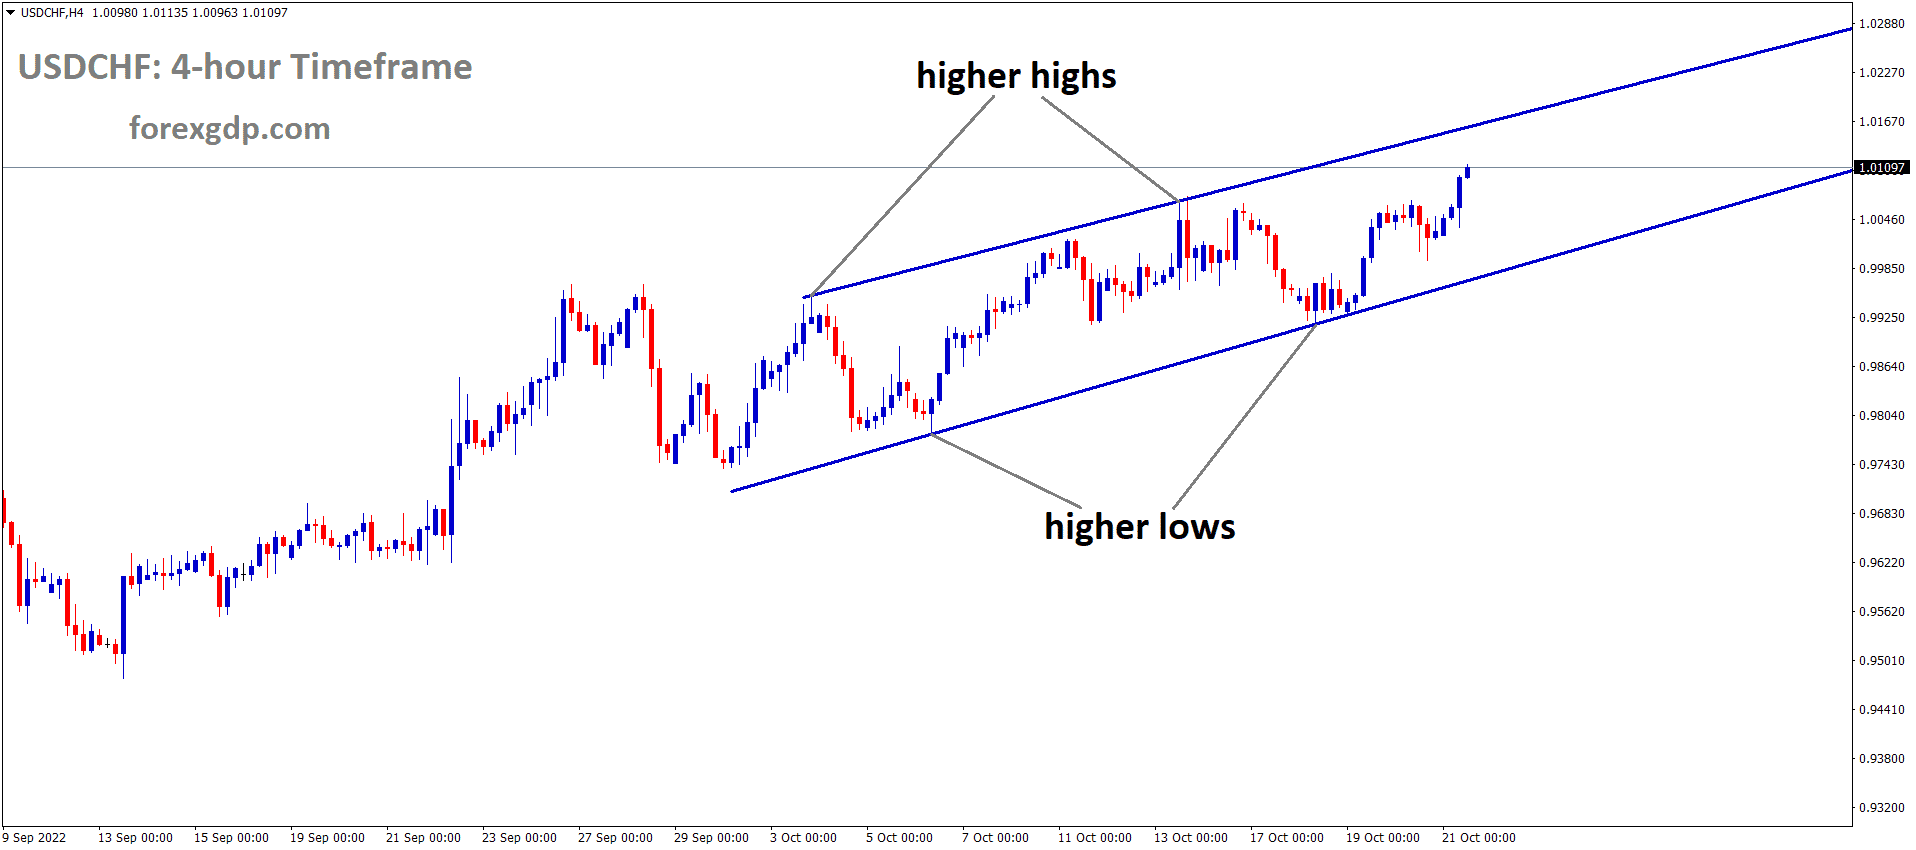 USDCHF is moving in an Ascending channel and the market has rebounded from the higher low area of the channel 1